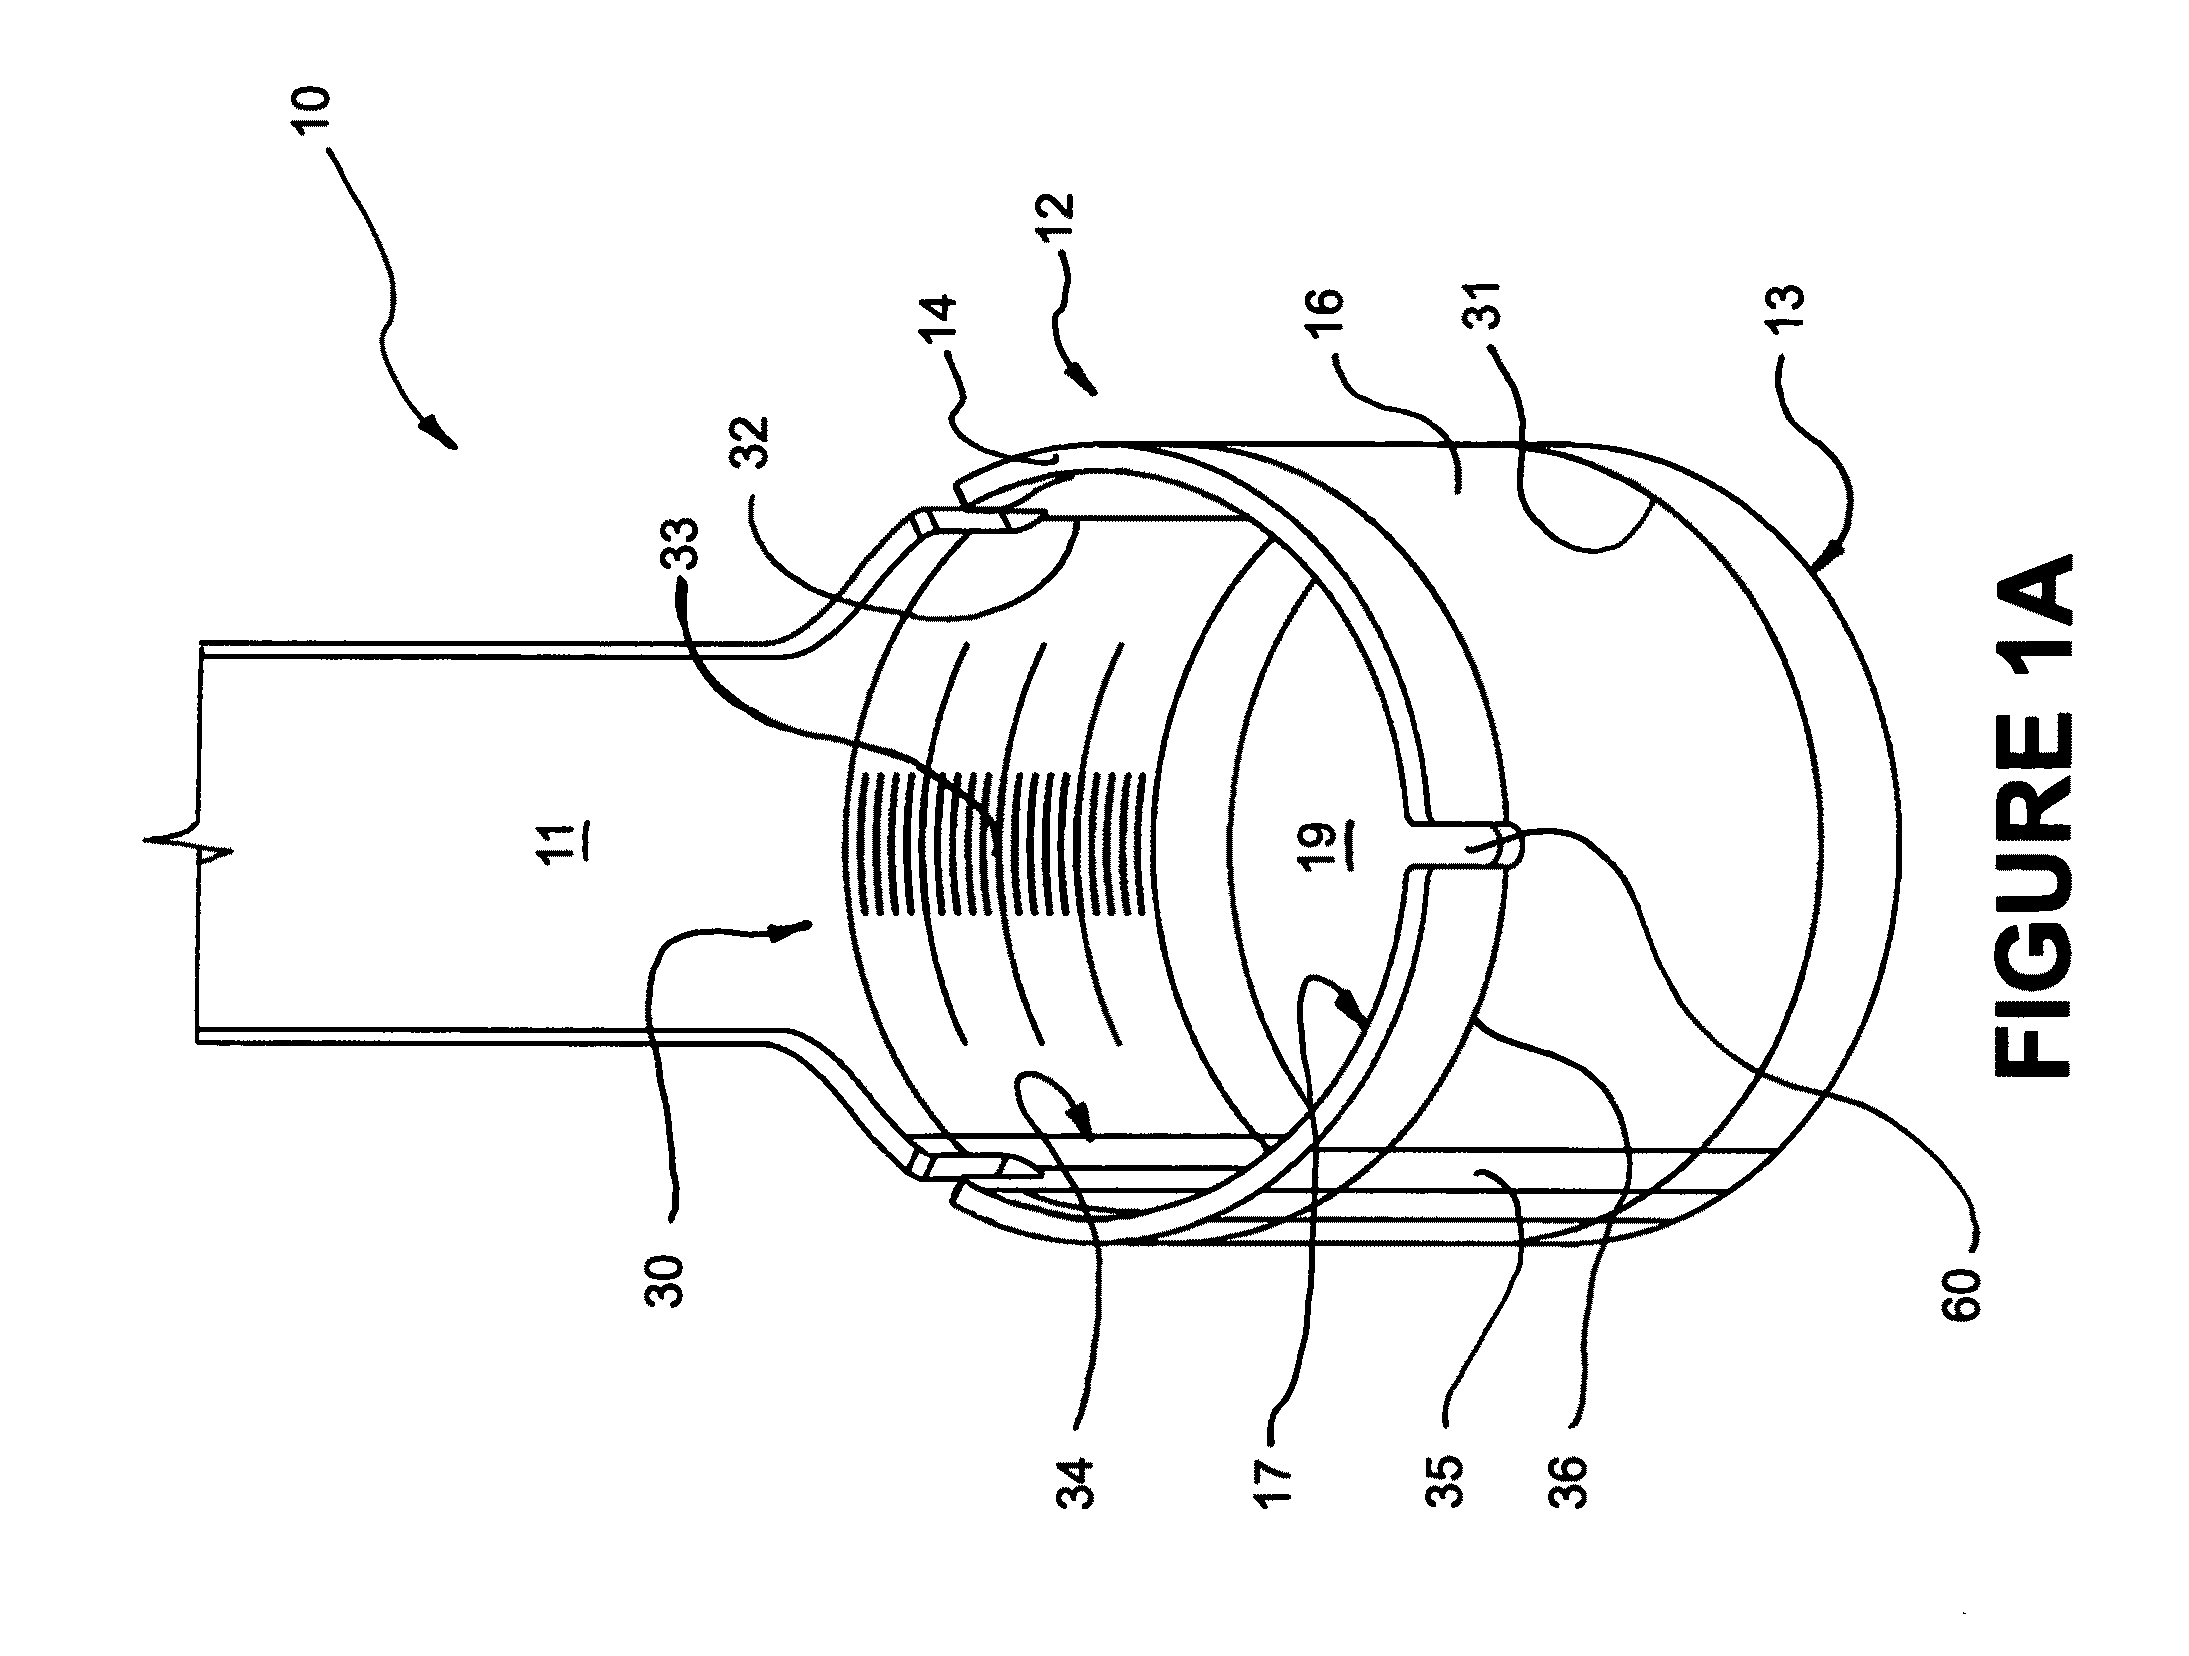 Surgical tool for measurement of valve annulus and cusp geometry